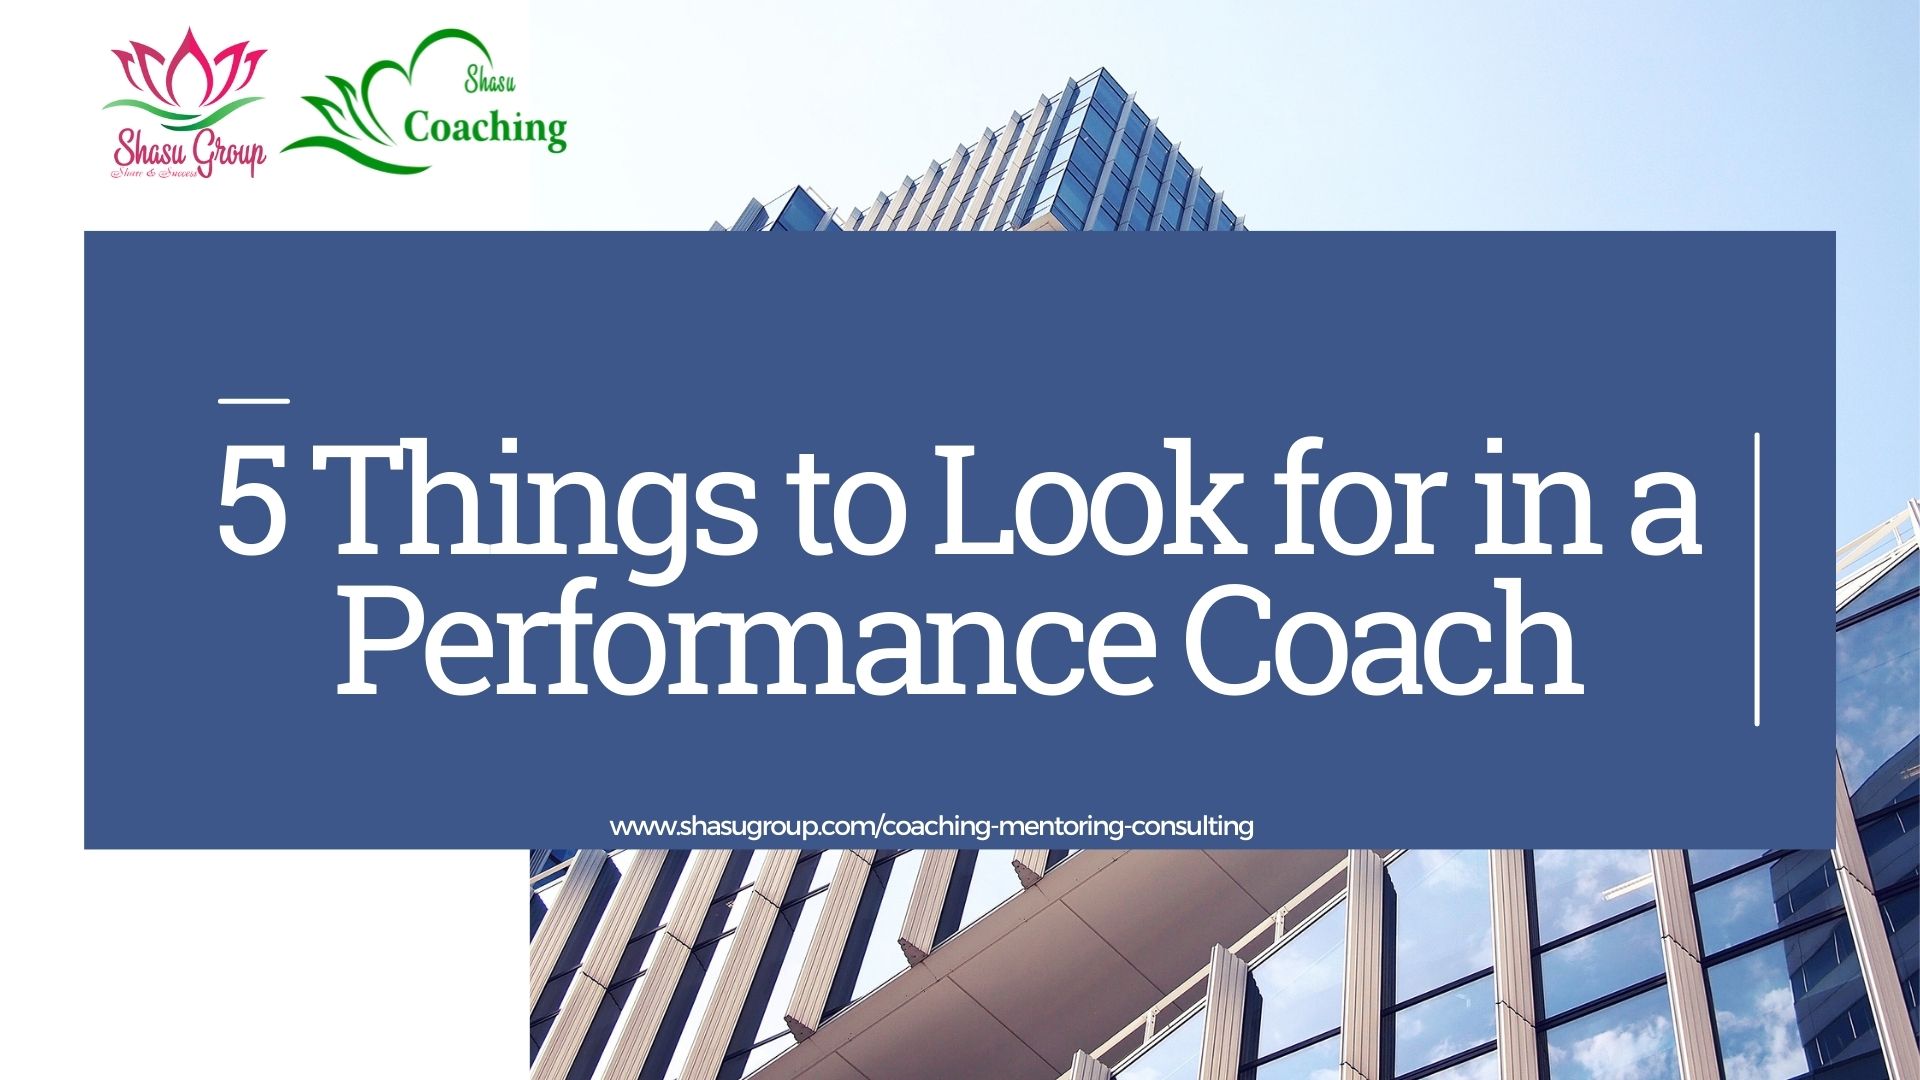 5 Things to Look for in a Performance Coach